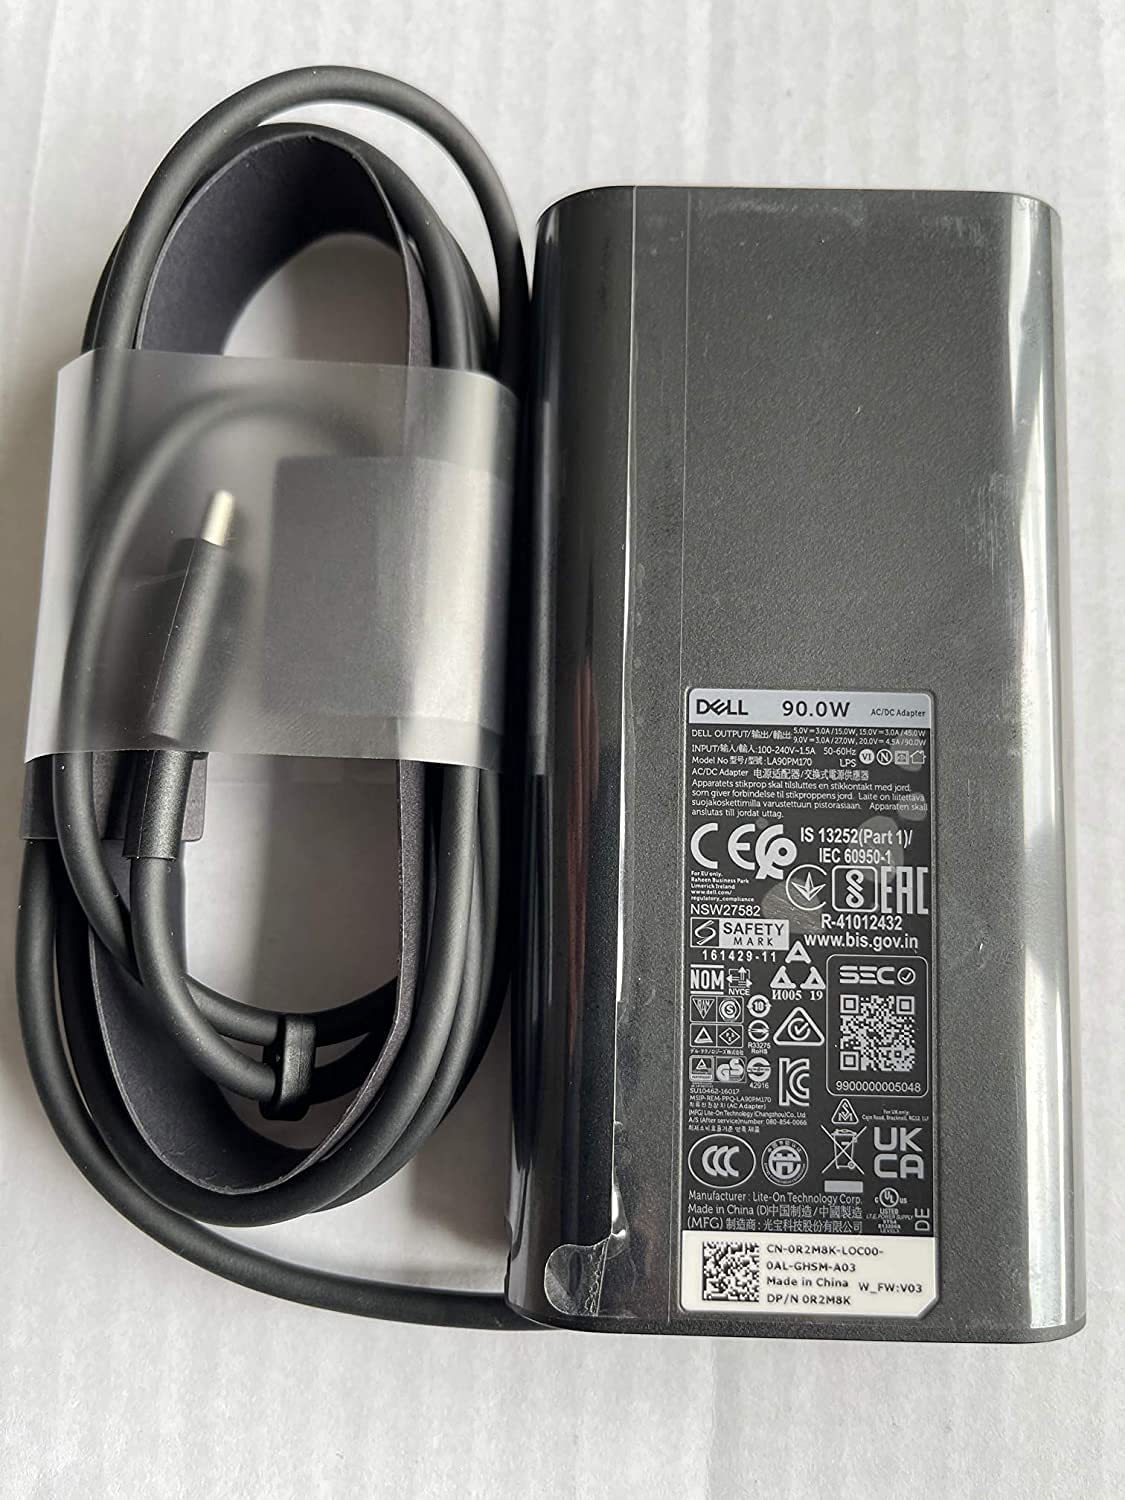 Original Dell 90W USB Type C (USB-C) Laptop Charger AC Power Adapter  Includes Power Cord for Dell XPS 13, Precision 3540, Latitude 3400,3500,  5289,5300 2in1,7400 2in1,7300,7390 2 in 1, 7200 2 in 1,5400,0TDK33